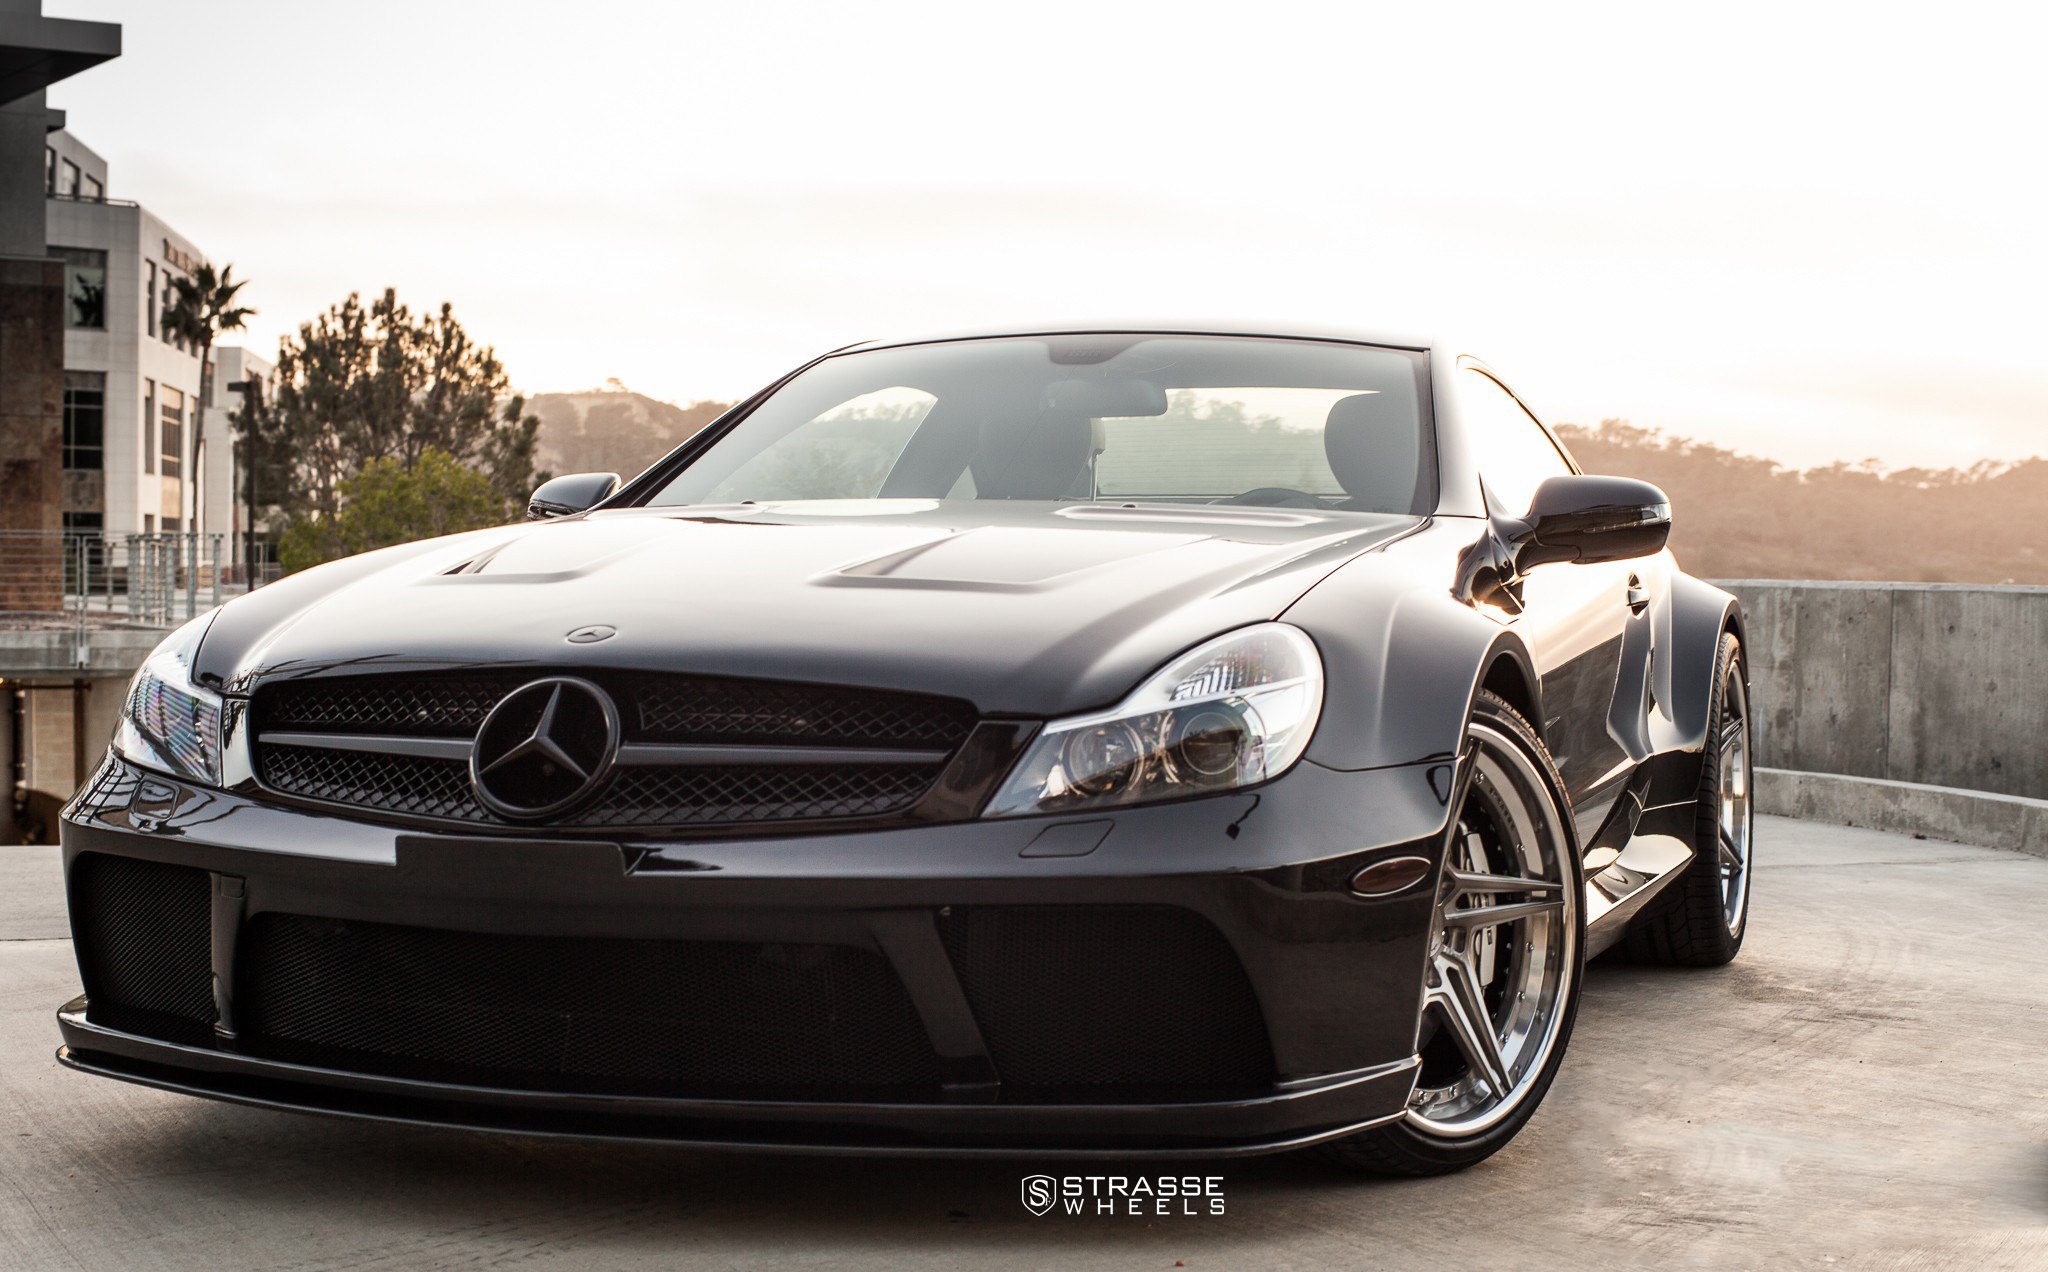 Blacked Out Grille and Vented Hood on Mercedes SL-Class - Photo by Strasse Forged